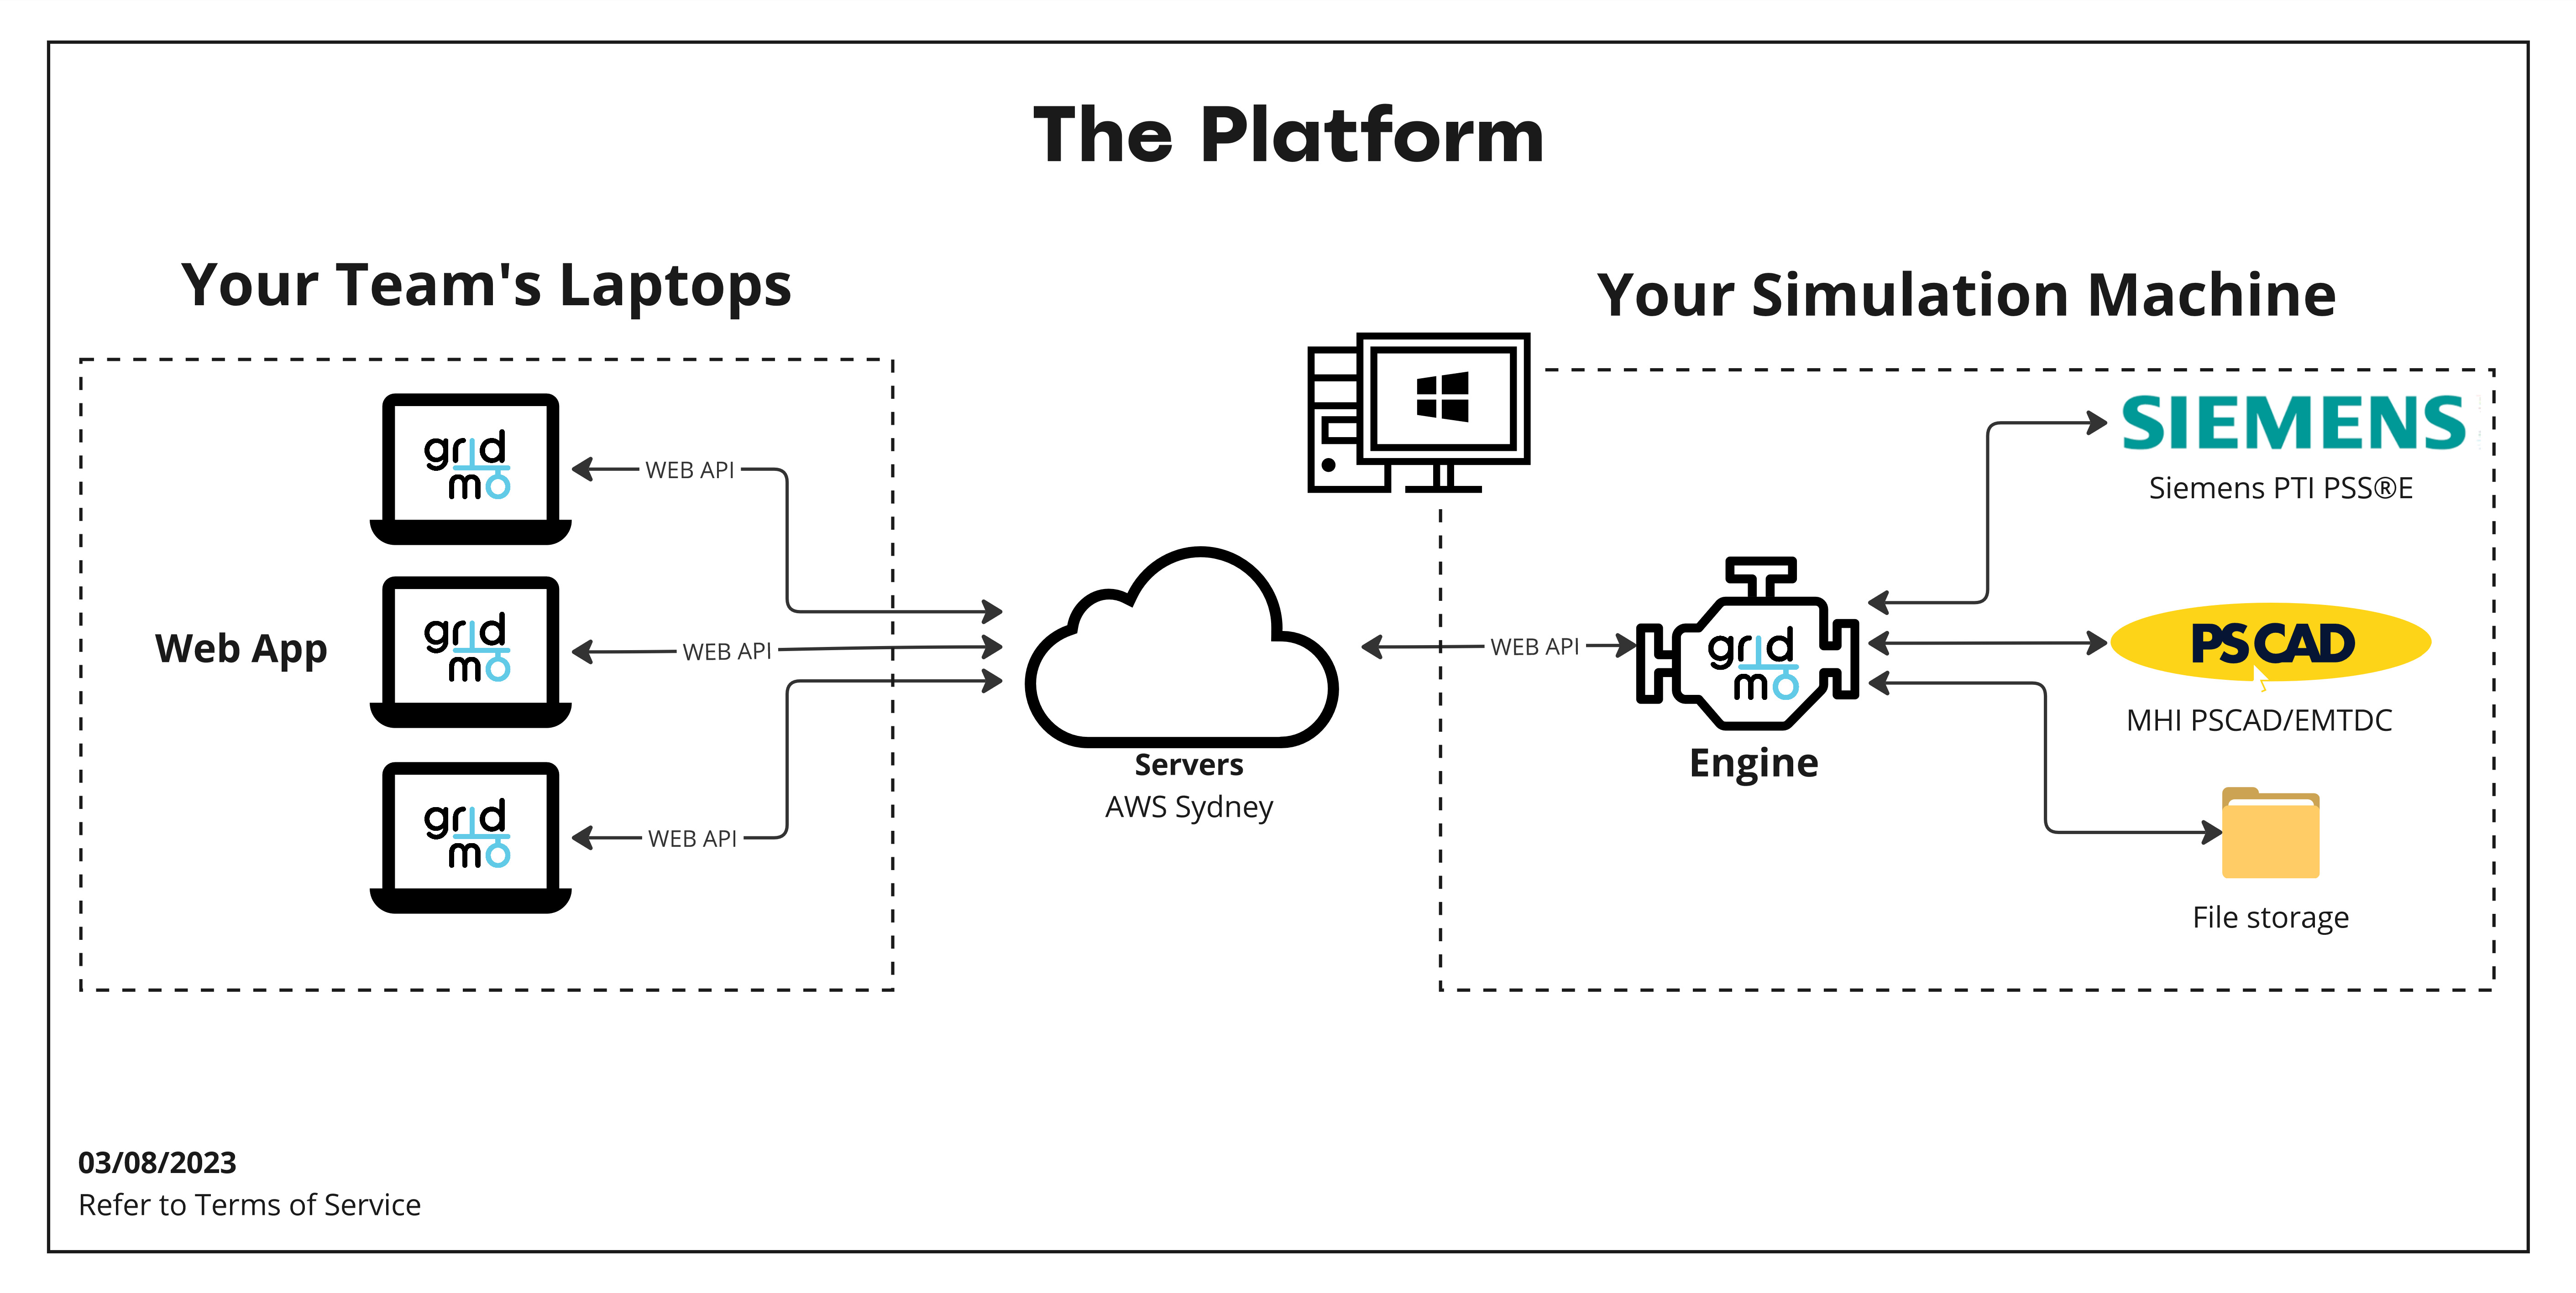 block diagram showing how the gridmo platform works including laptops running gridmo&#39;s web app, gridmo&#39;s servers and the customer&#39;s simulation PC